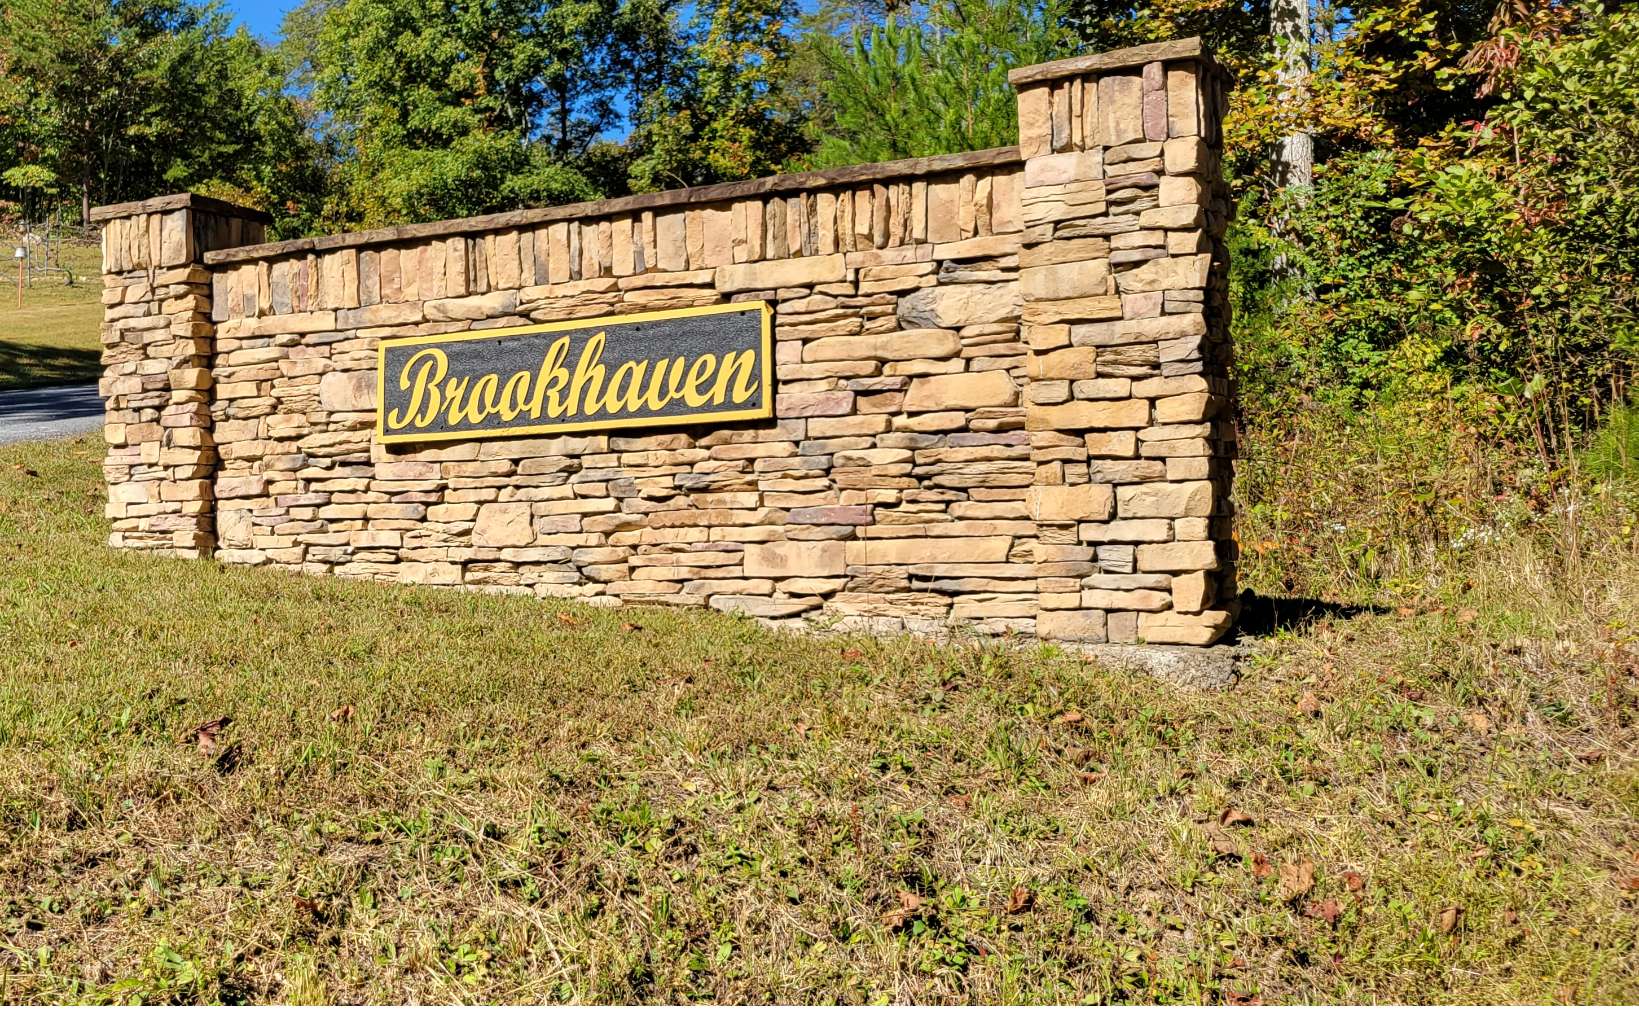 It's time to build your dream home in the mountains! Check out this lot in a quiet subdivision with no fees! This great corner lot has year-round mountain views and centrally located to Blairsville, Young Harris, and Hiawassee.